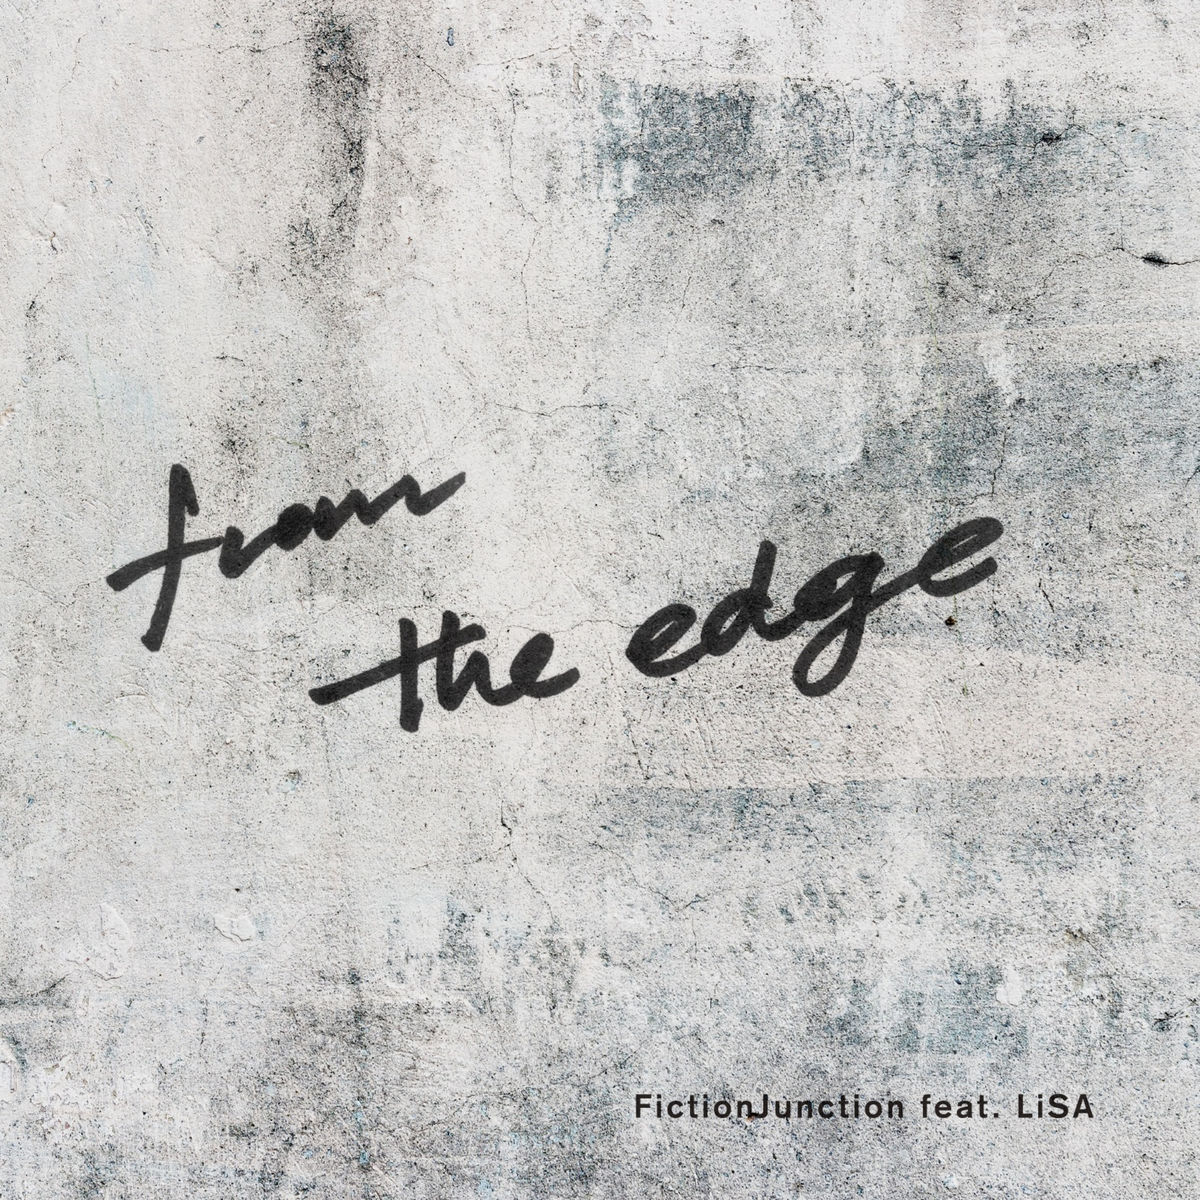 『FictionJunction feat. LiSA - from the edge 歌詞』収録の『from the edge』ジャケット